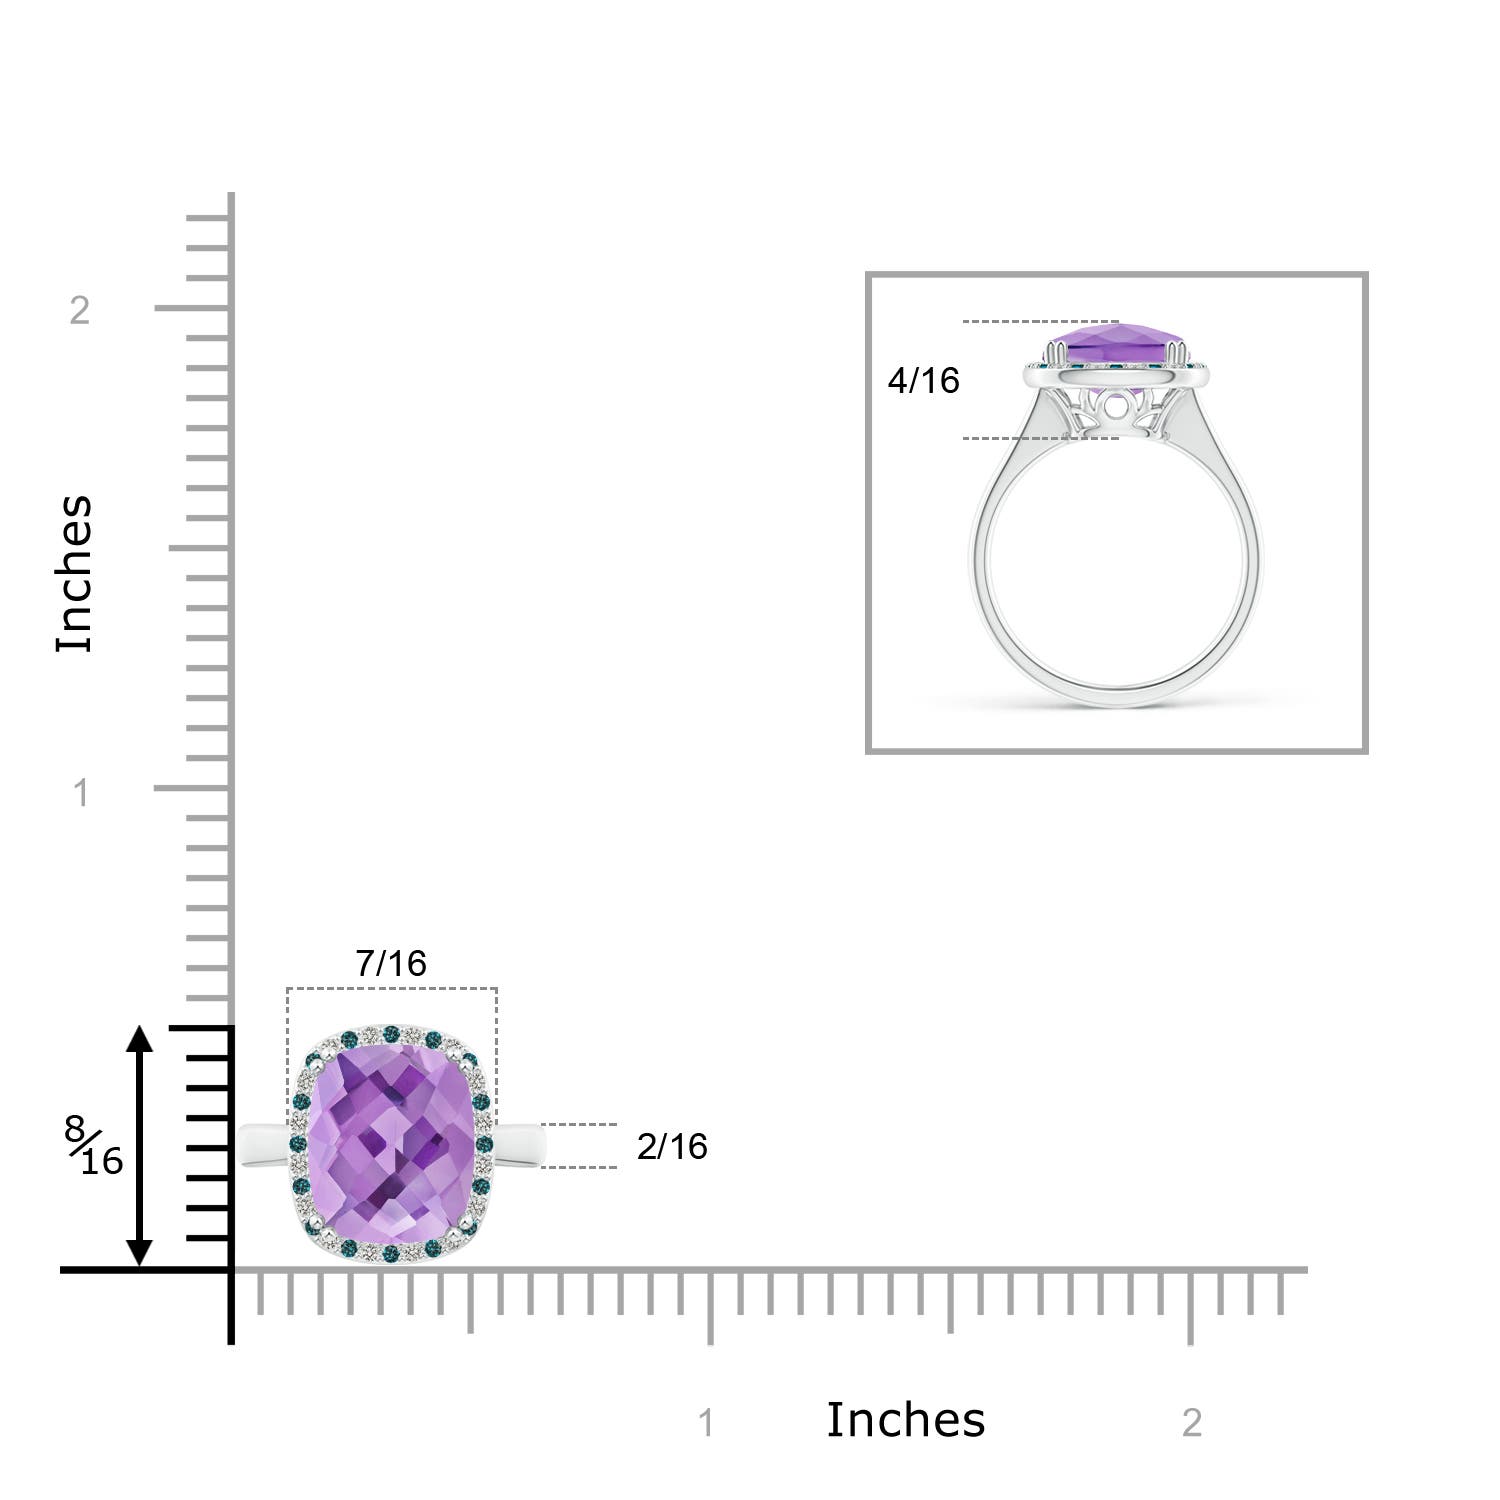 A - Amethyst / 3.14 CT / 14 KT White Gold